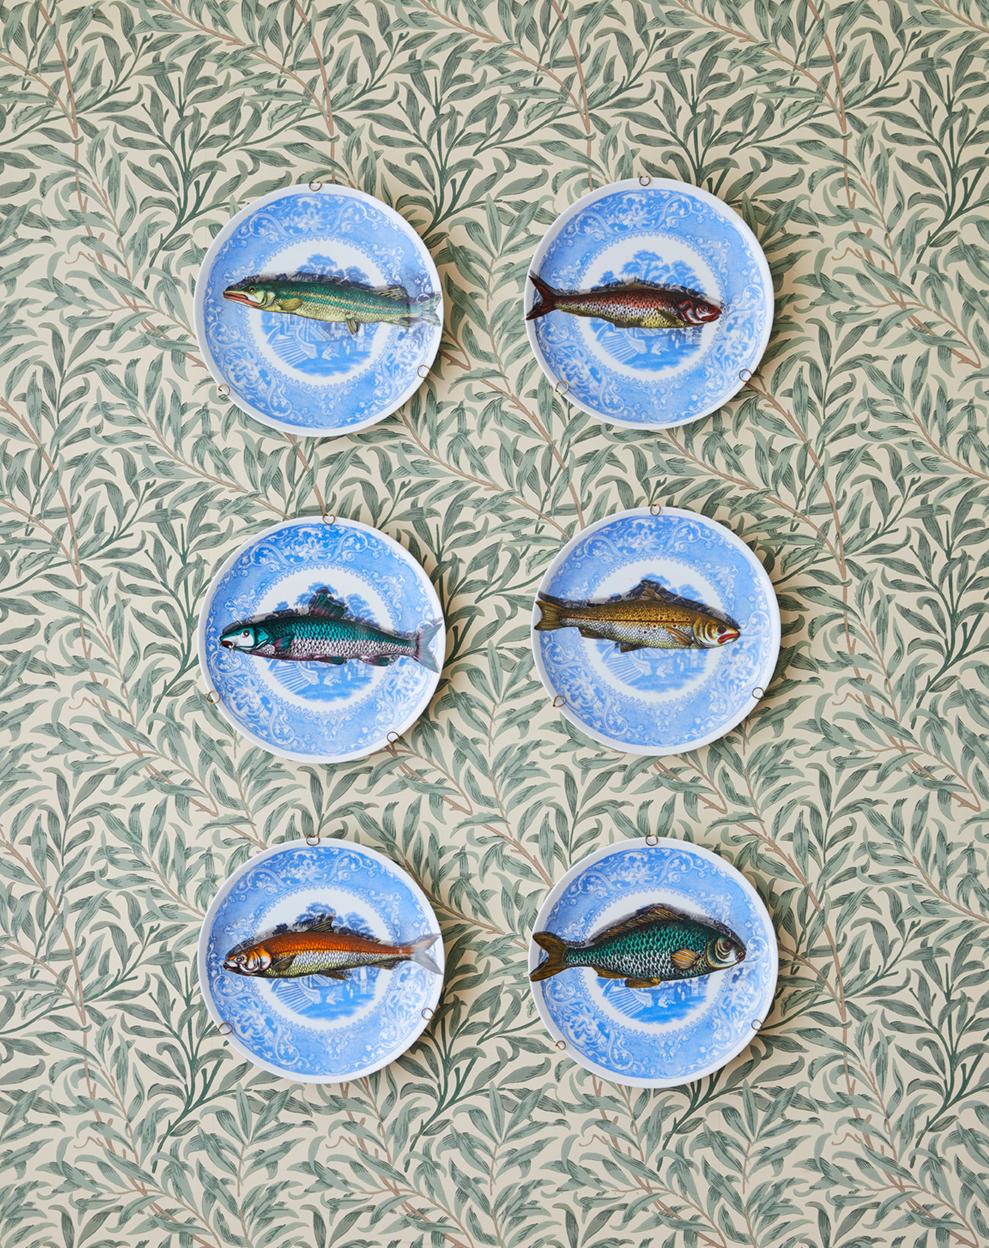 Piero Fornasetti
Italy, 1955

Six porcelain hanging platters with various printed polychrome fish on blue and white base. Stamped “Piscibus Fornasetti”. 

About
Italian painter, sculptor and illustrator Piero Fornasetti (1913-88) - famous for his